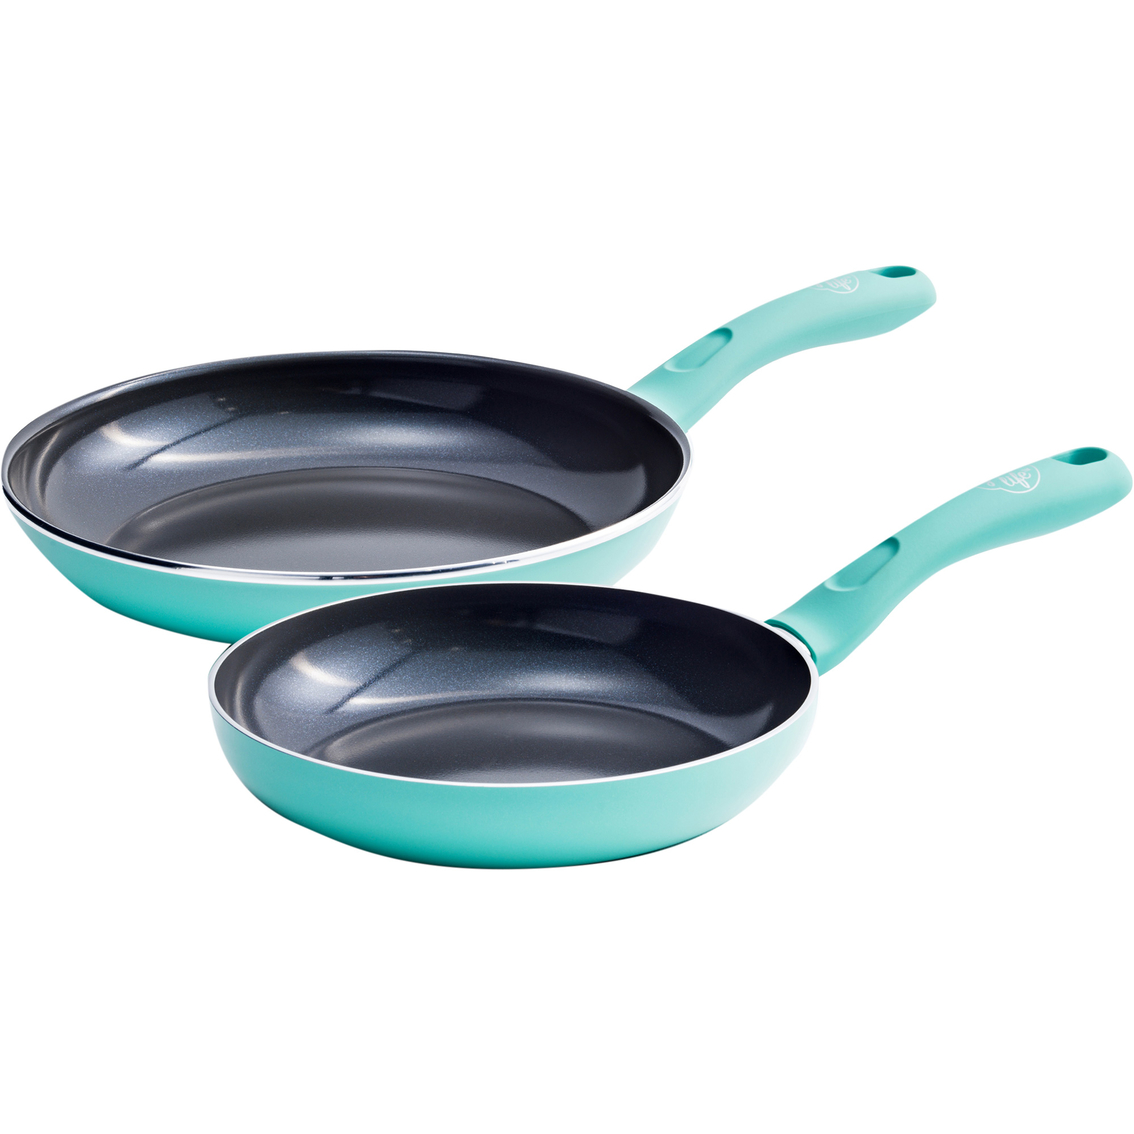 GreenLife  Soft Grip 7 and 10-Inch Frypan Set